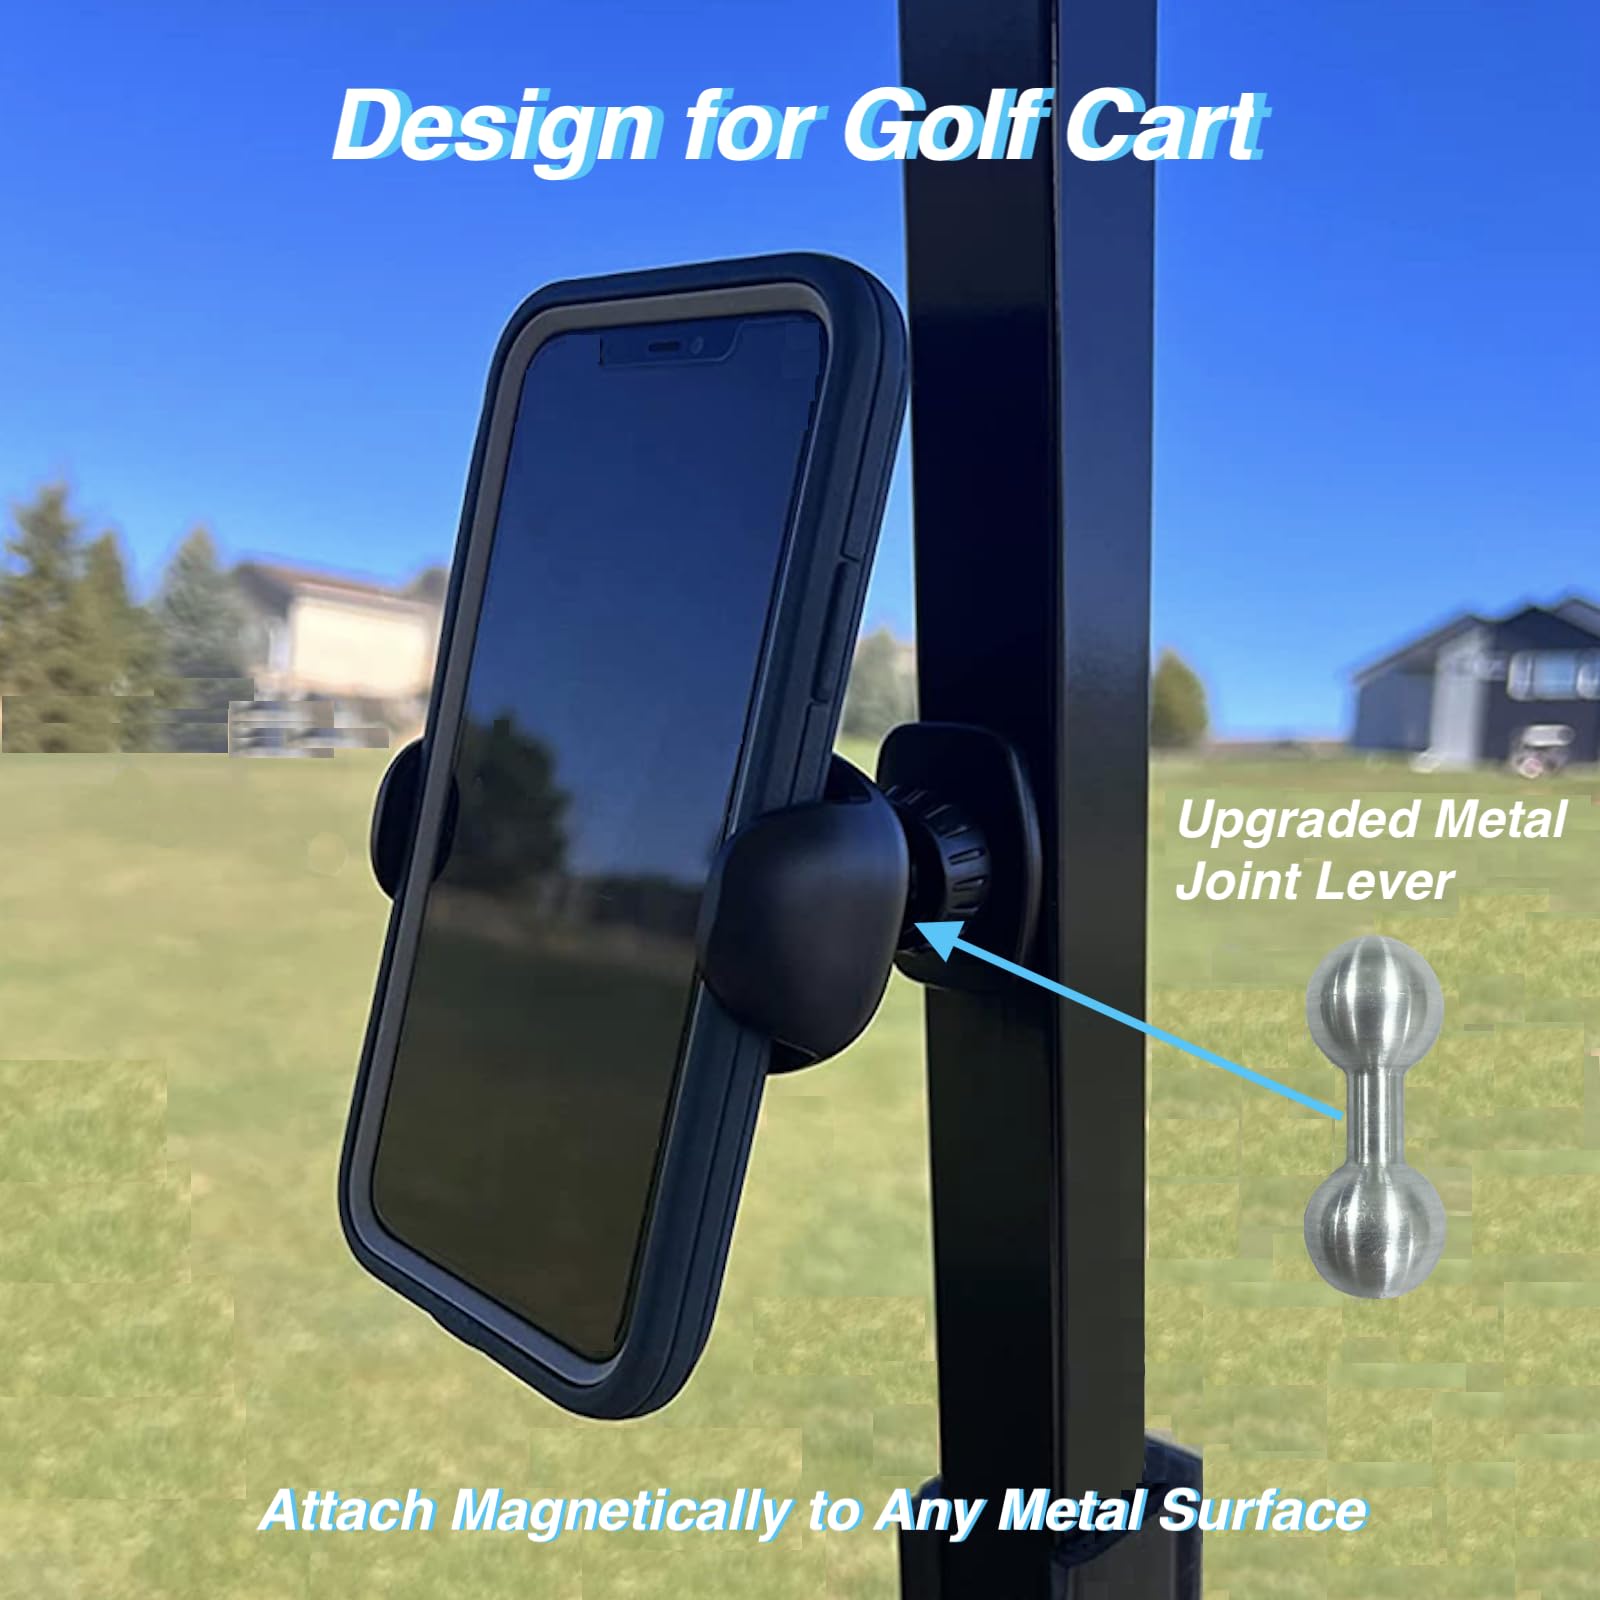 ARMOLABX [Upgraded] Golf Cart Magnetic Phone Holder Mount, Golf Cart Phone Holder [Big Phones & Thick Cases Friendly], Magnetic Phone Holder for Golf Cart Attach to Metal Surface for All Smartphones